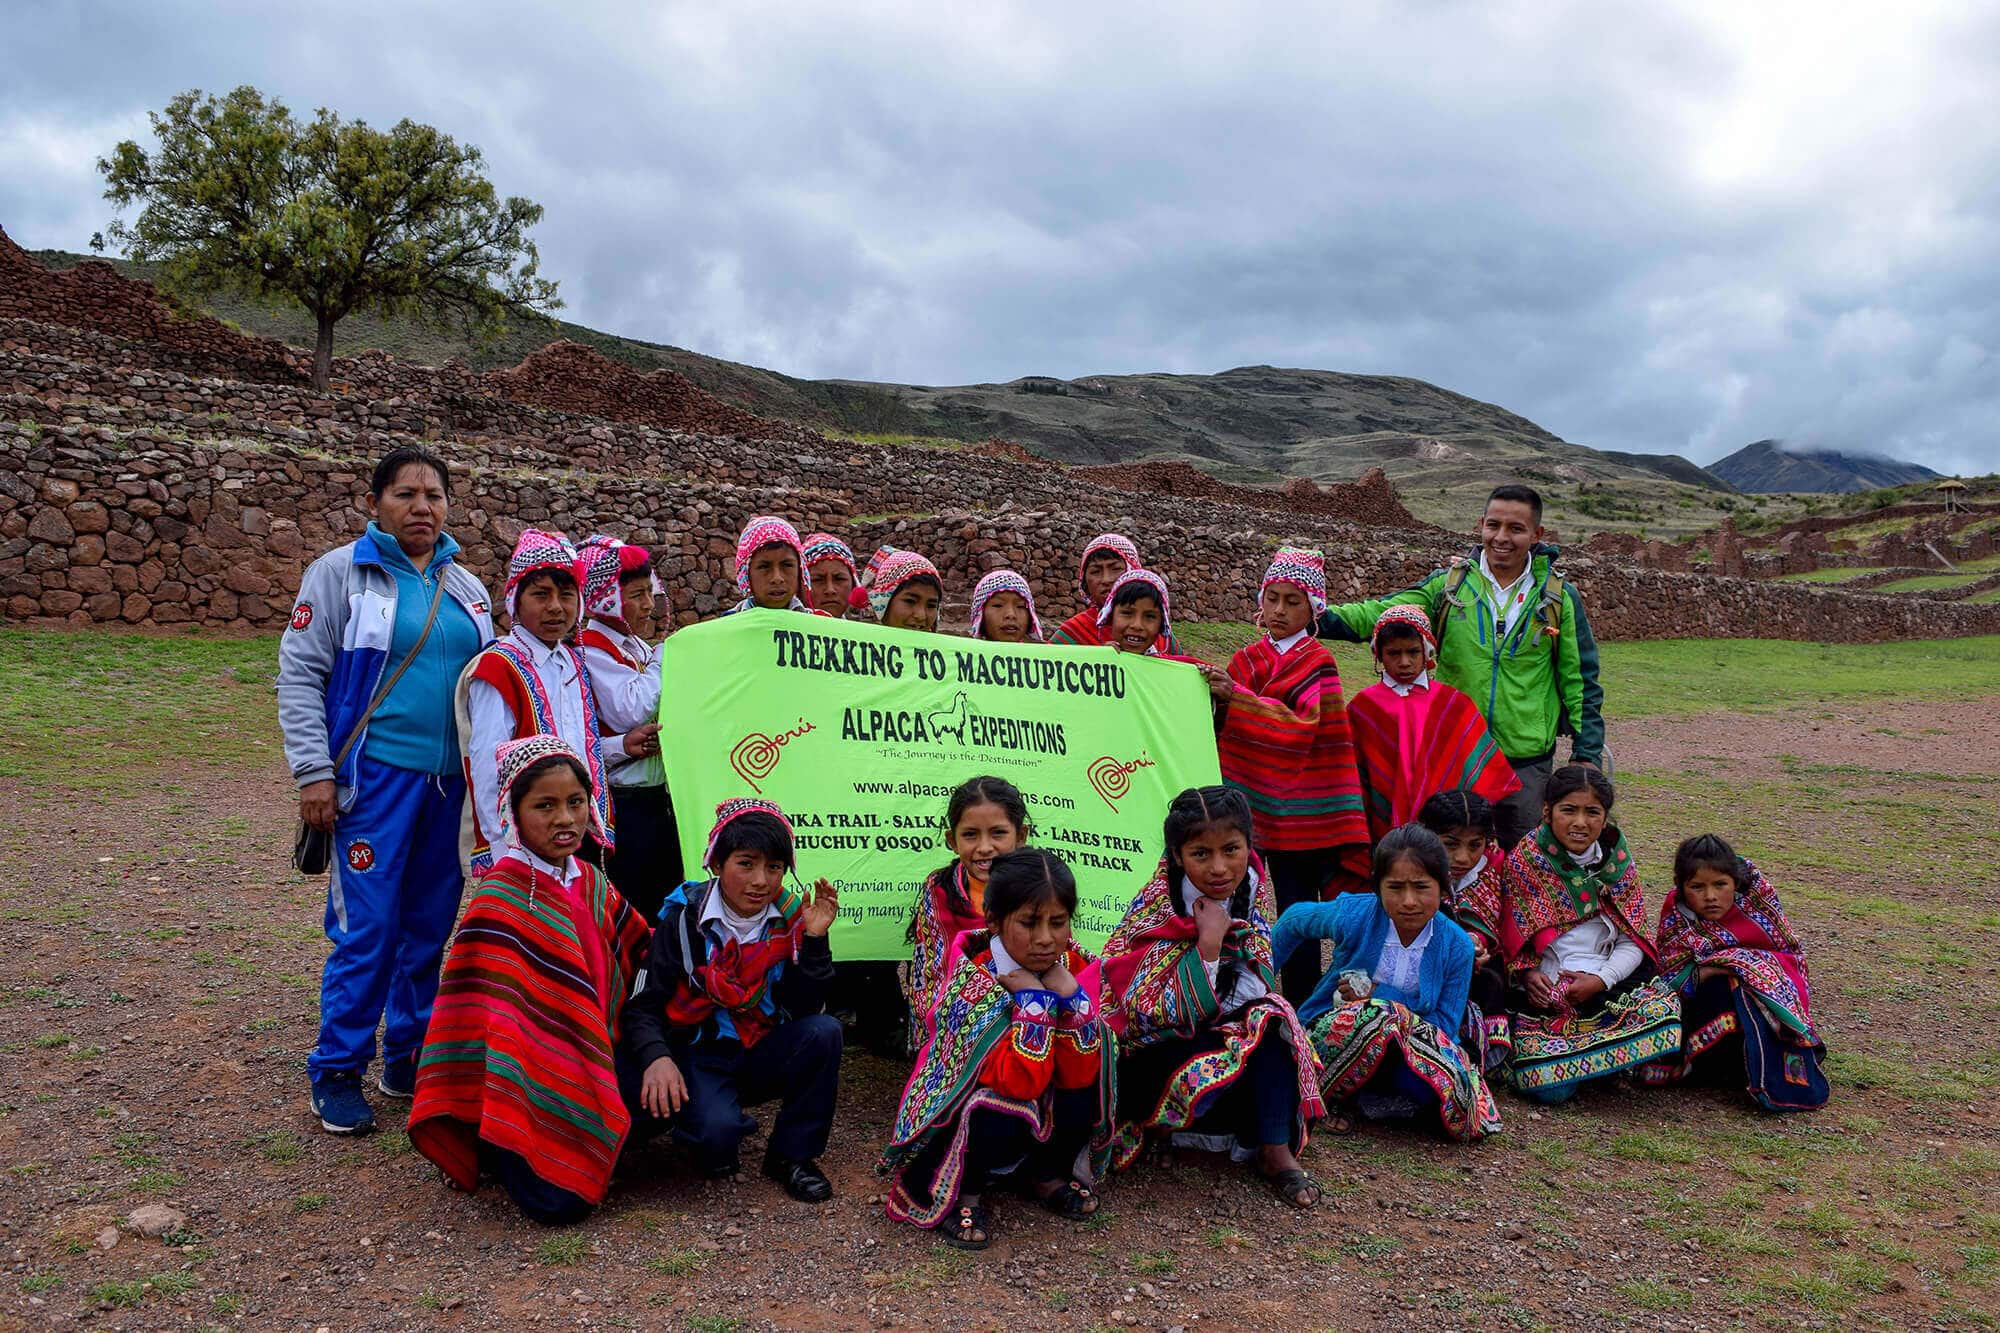 The Children of Huama the Valley in Cusco